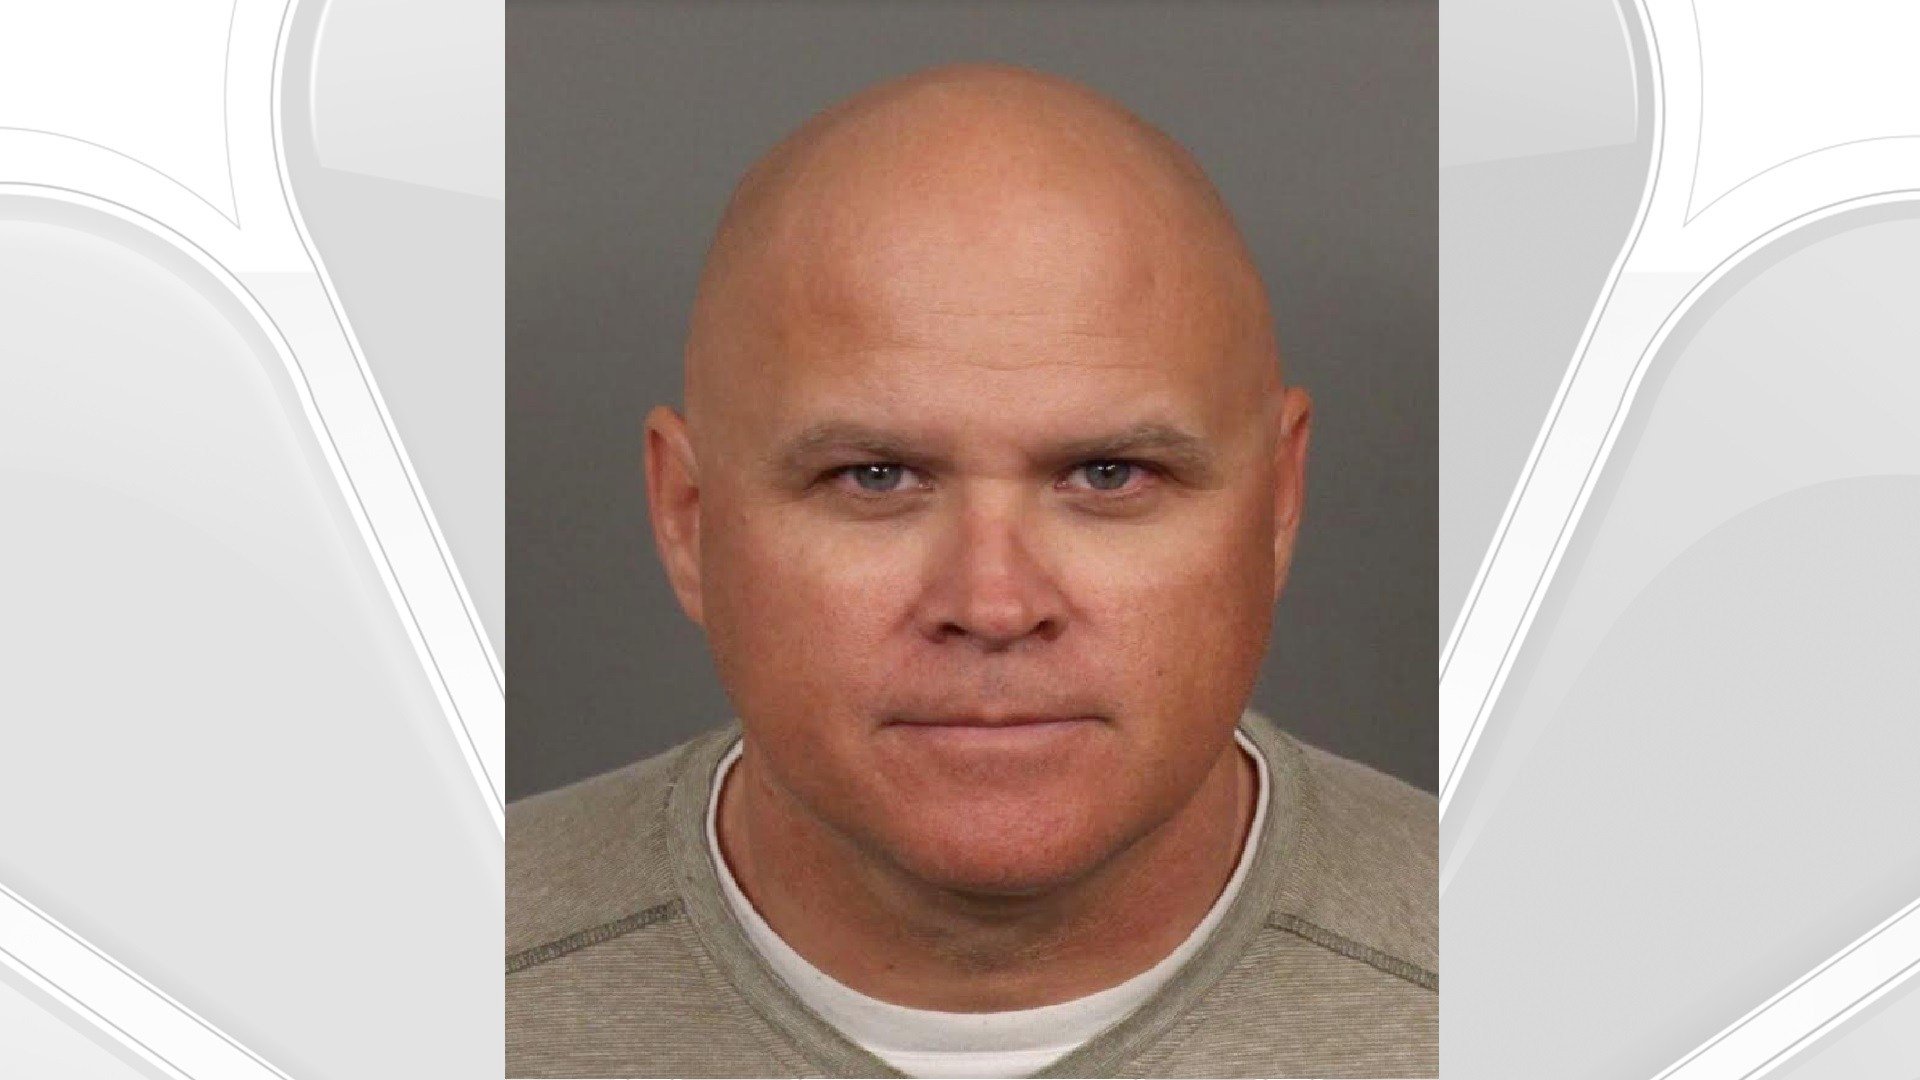 Security guard Indio School Arrested for Alleged Inappropriate Texts With Student